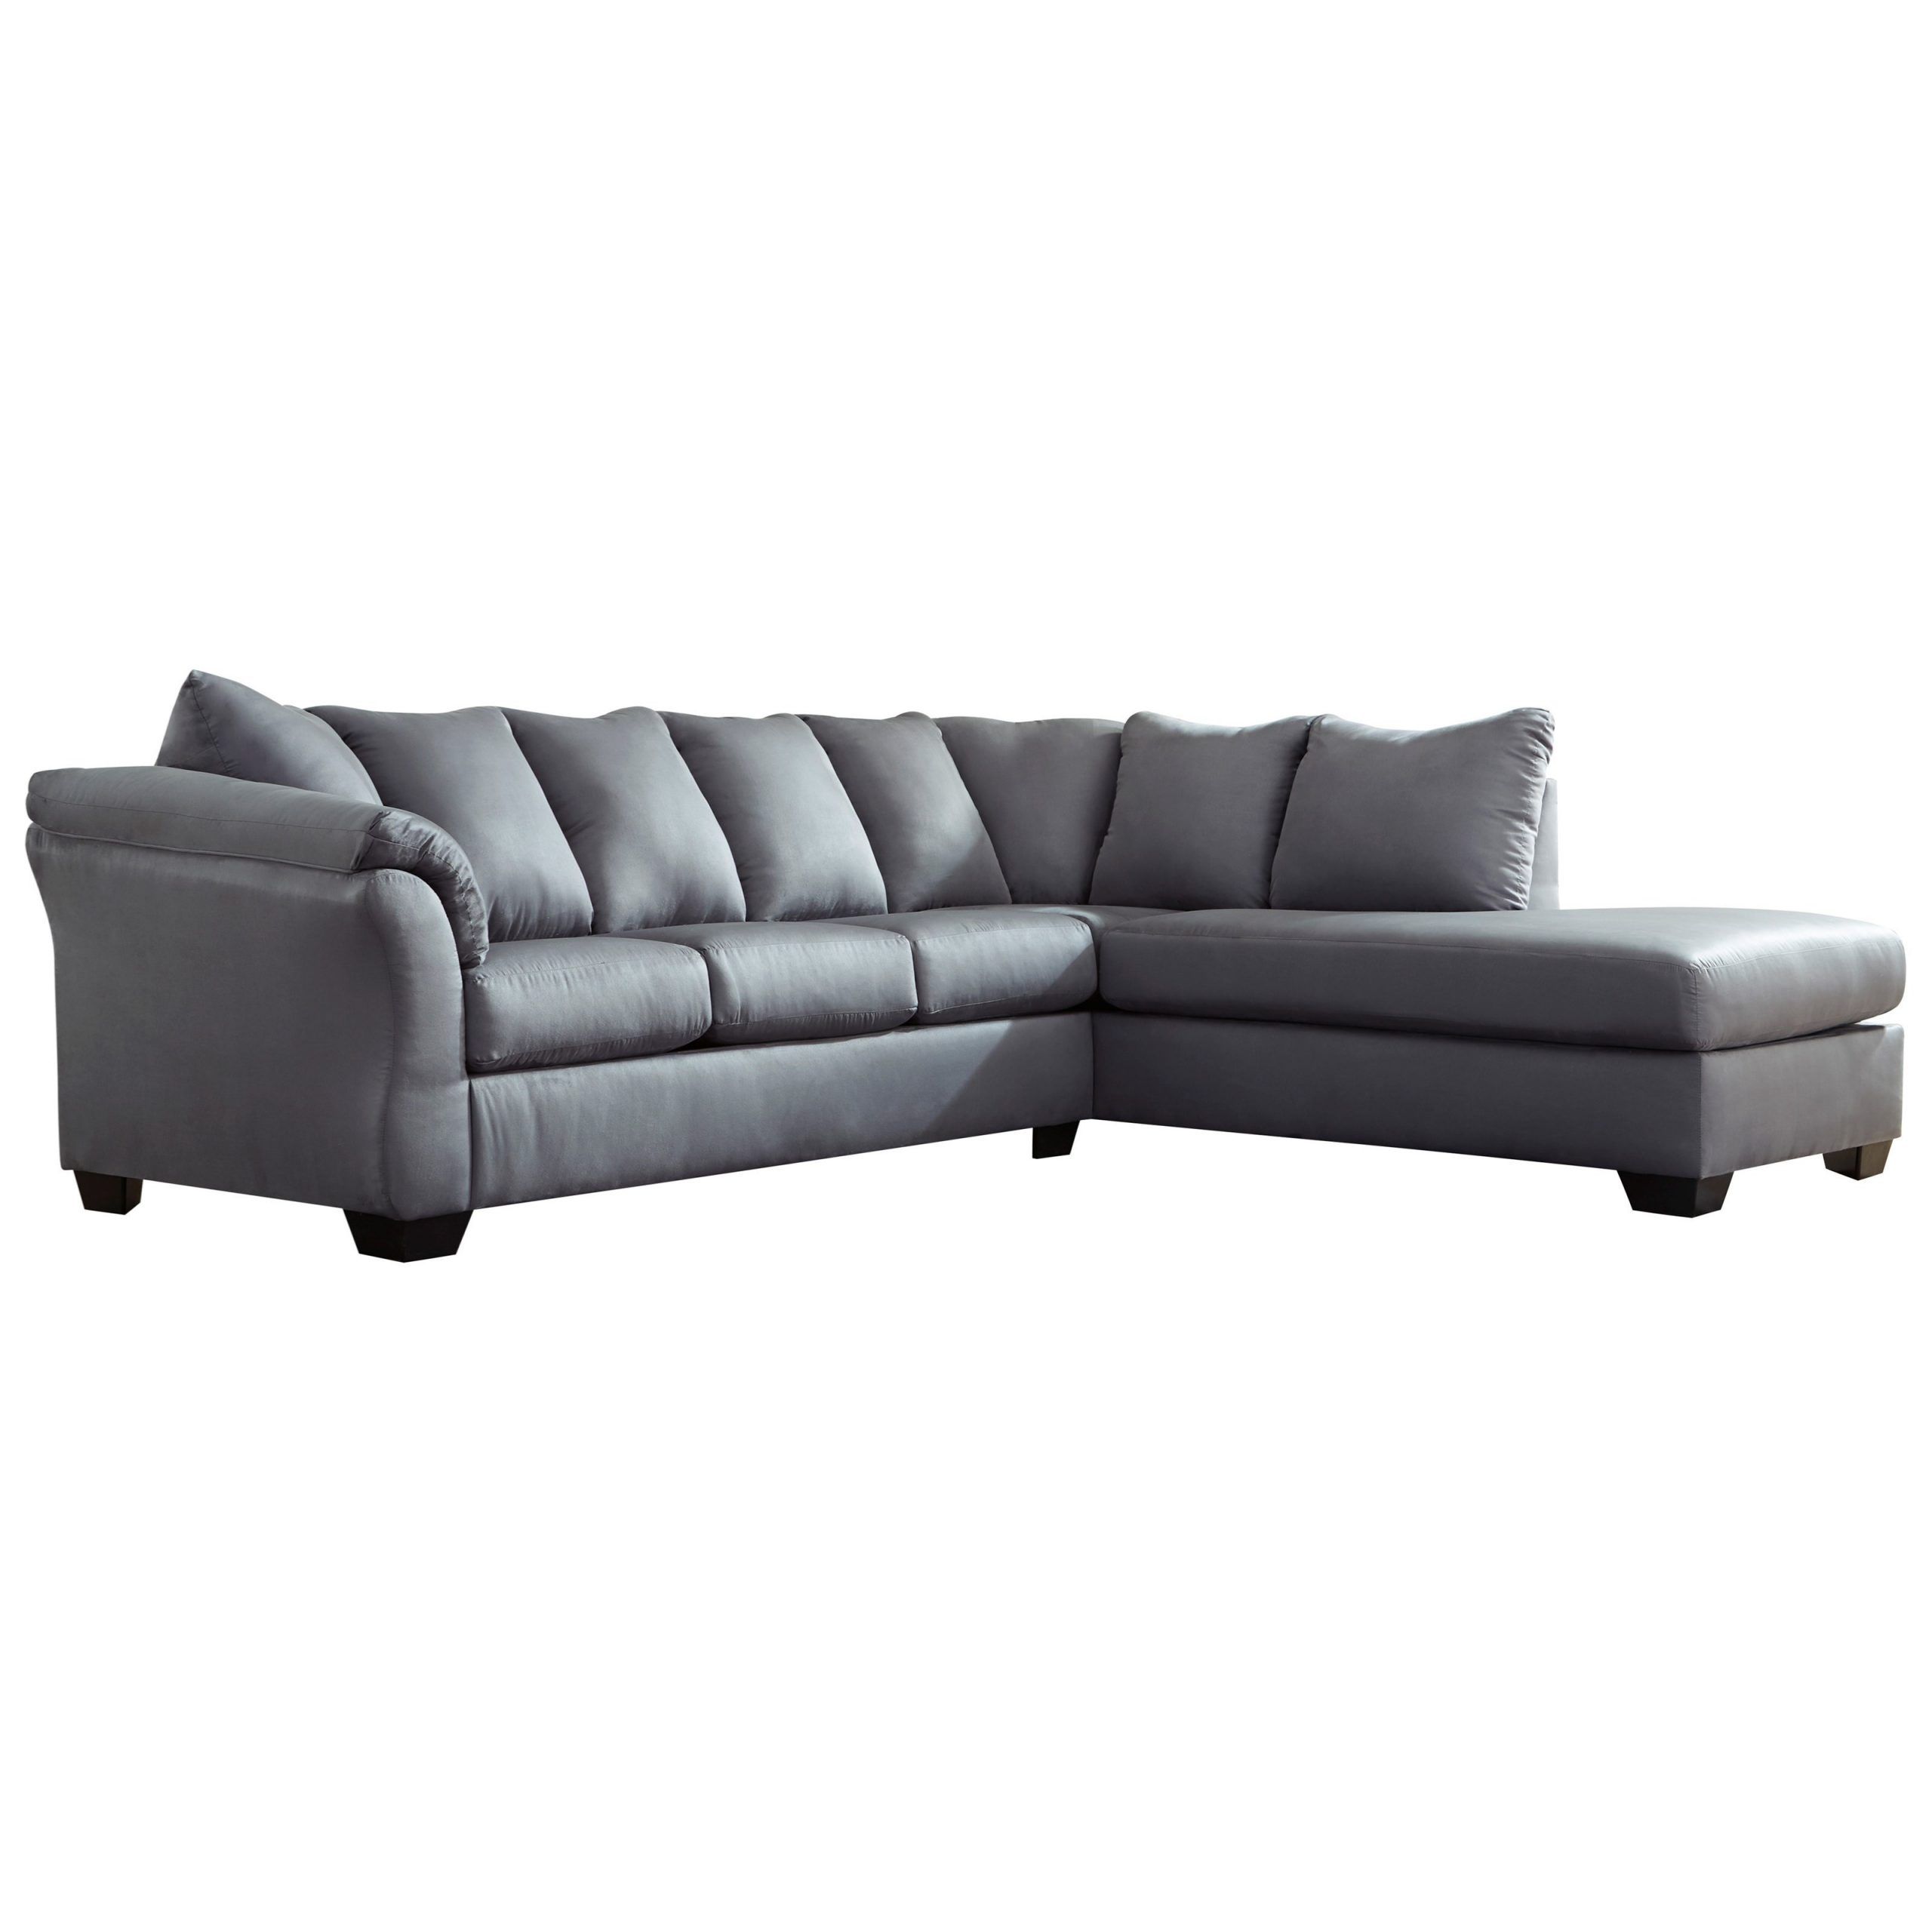 Signature Designashley Darcy – Steel Contemporary 2 Intended For 2018 2pc Burland Contemporary Chaise Sectional Sofas (View 4 of 20)